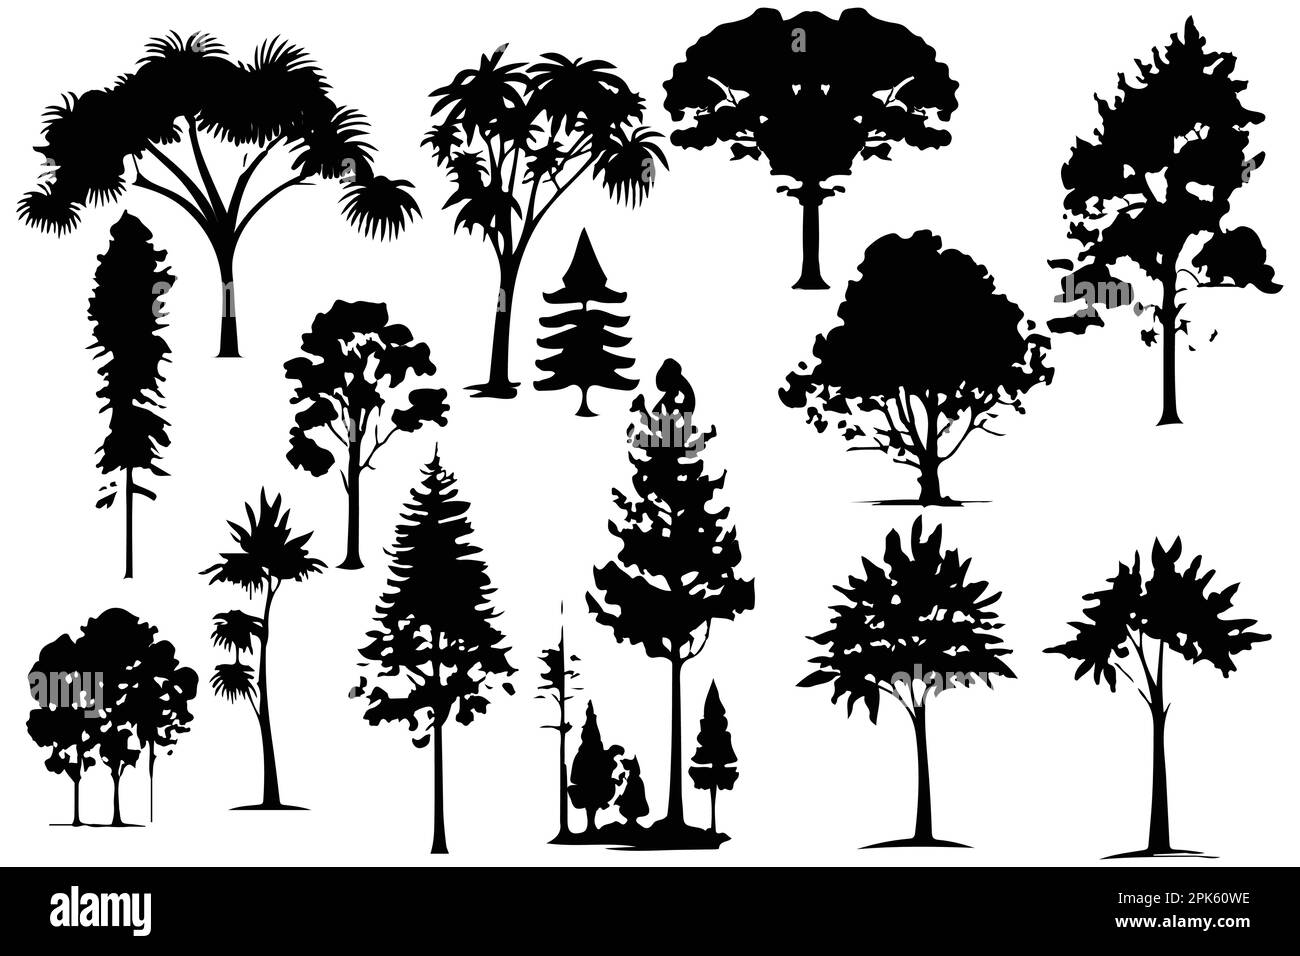 trees and forest silhouettes set isolated vector illustration Stock ...